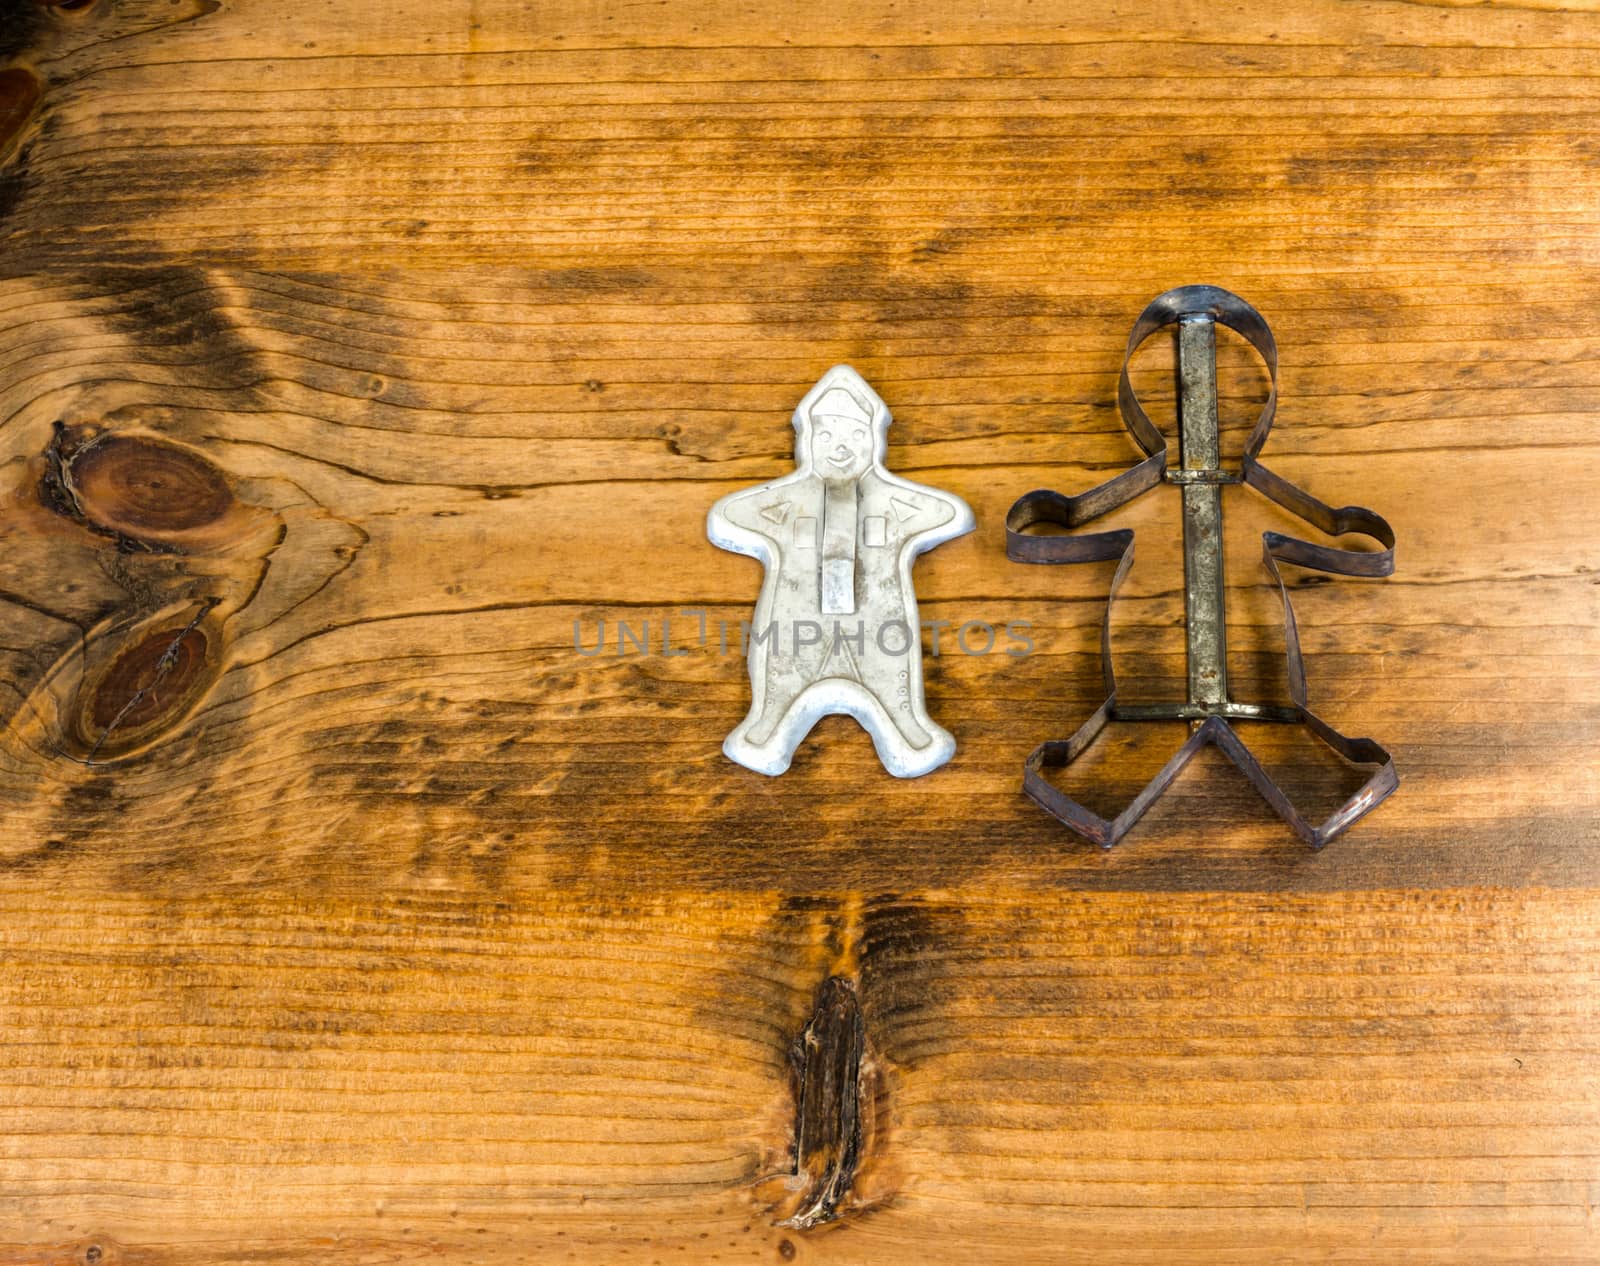 Tin Cookie Cutters Sitting on Wooden Table With Knots